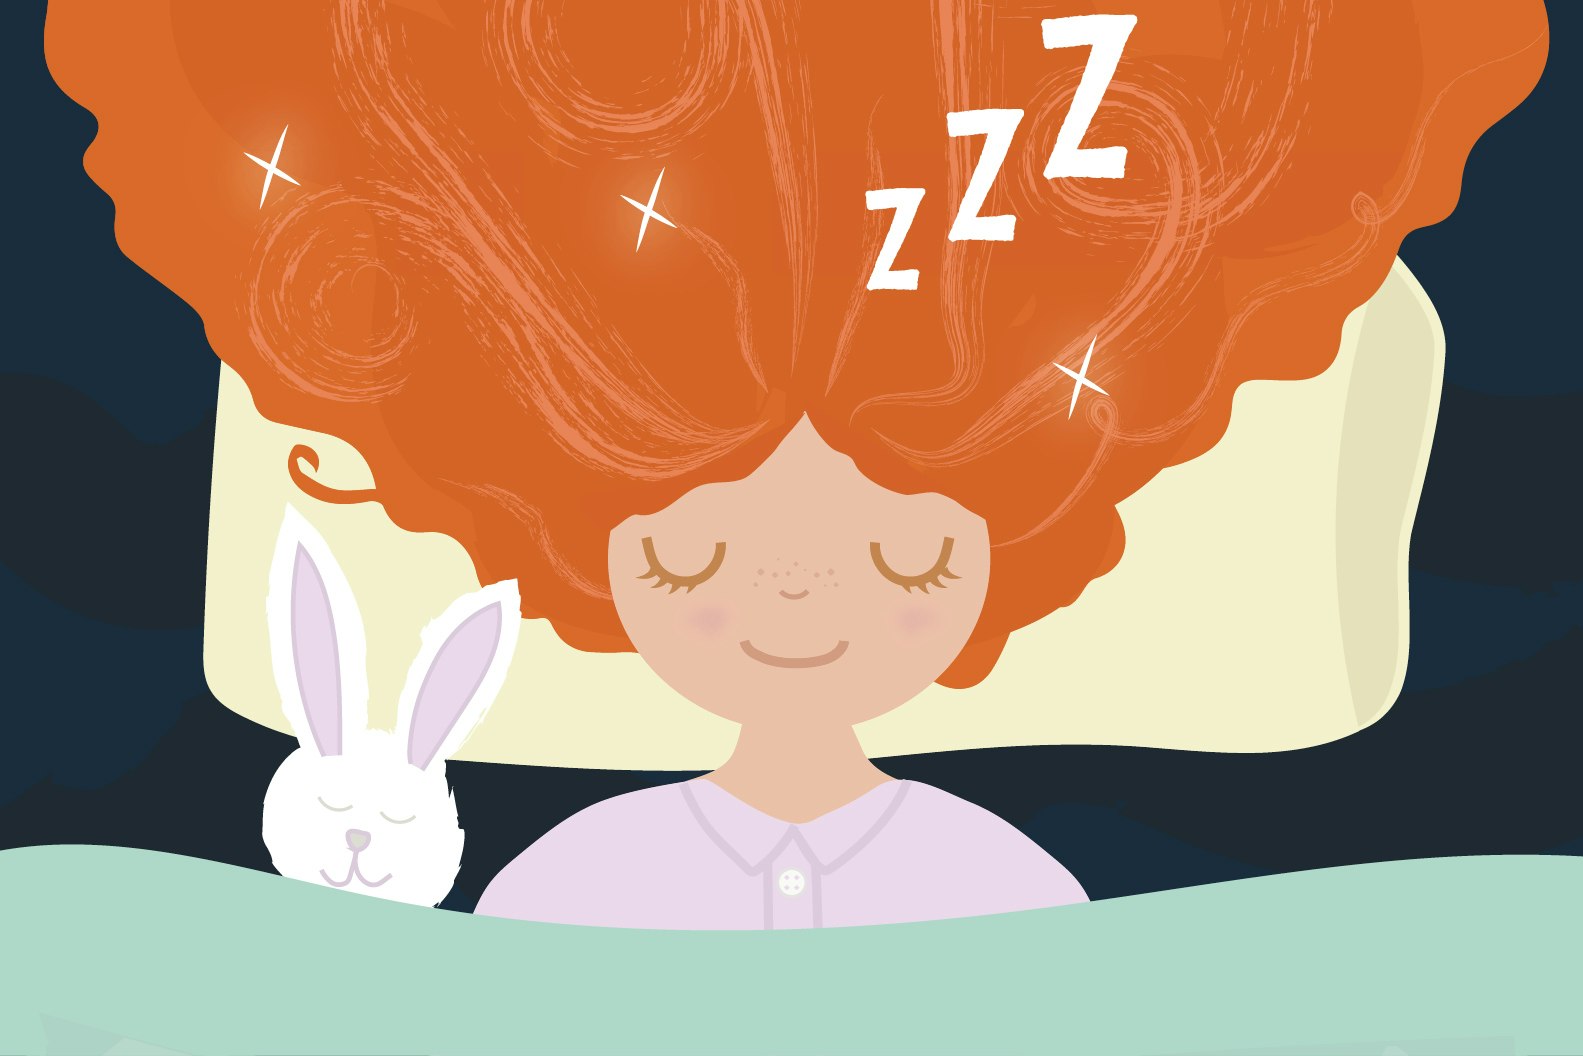 Illustration of a child sleeping happily, snuggled with a toy rabbit